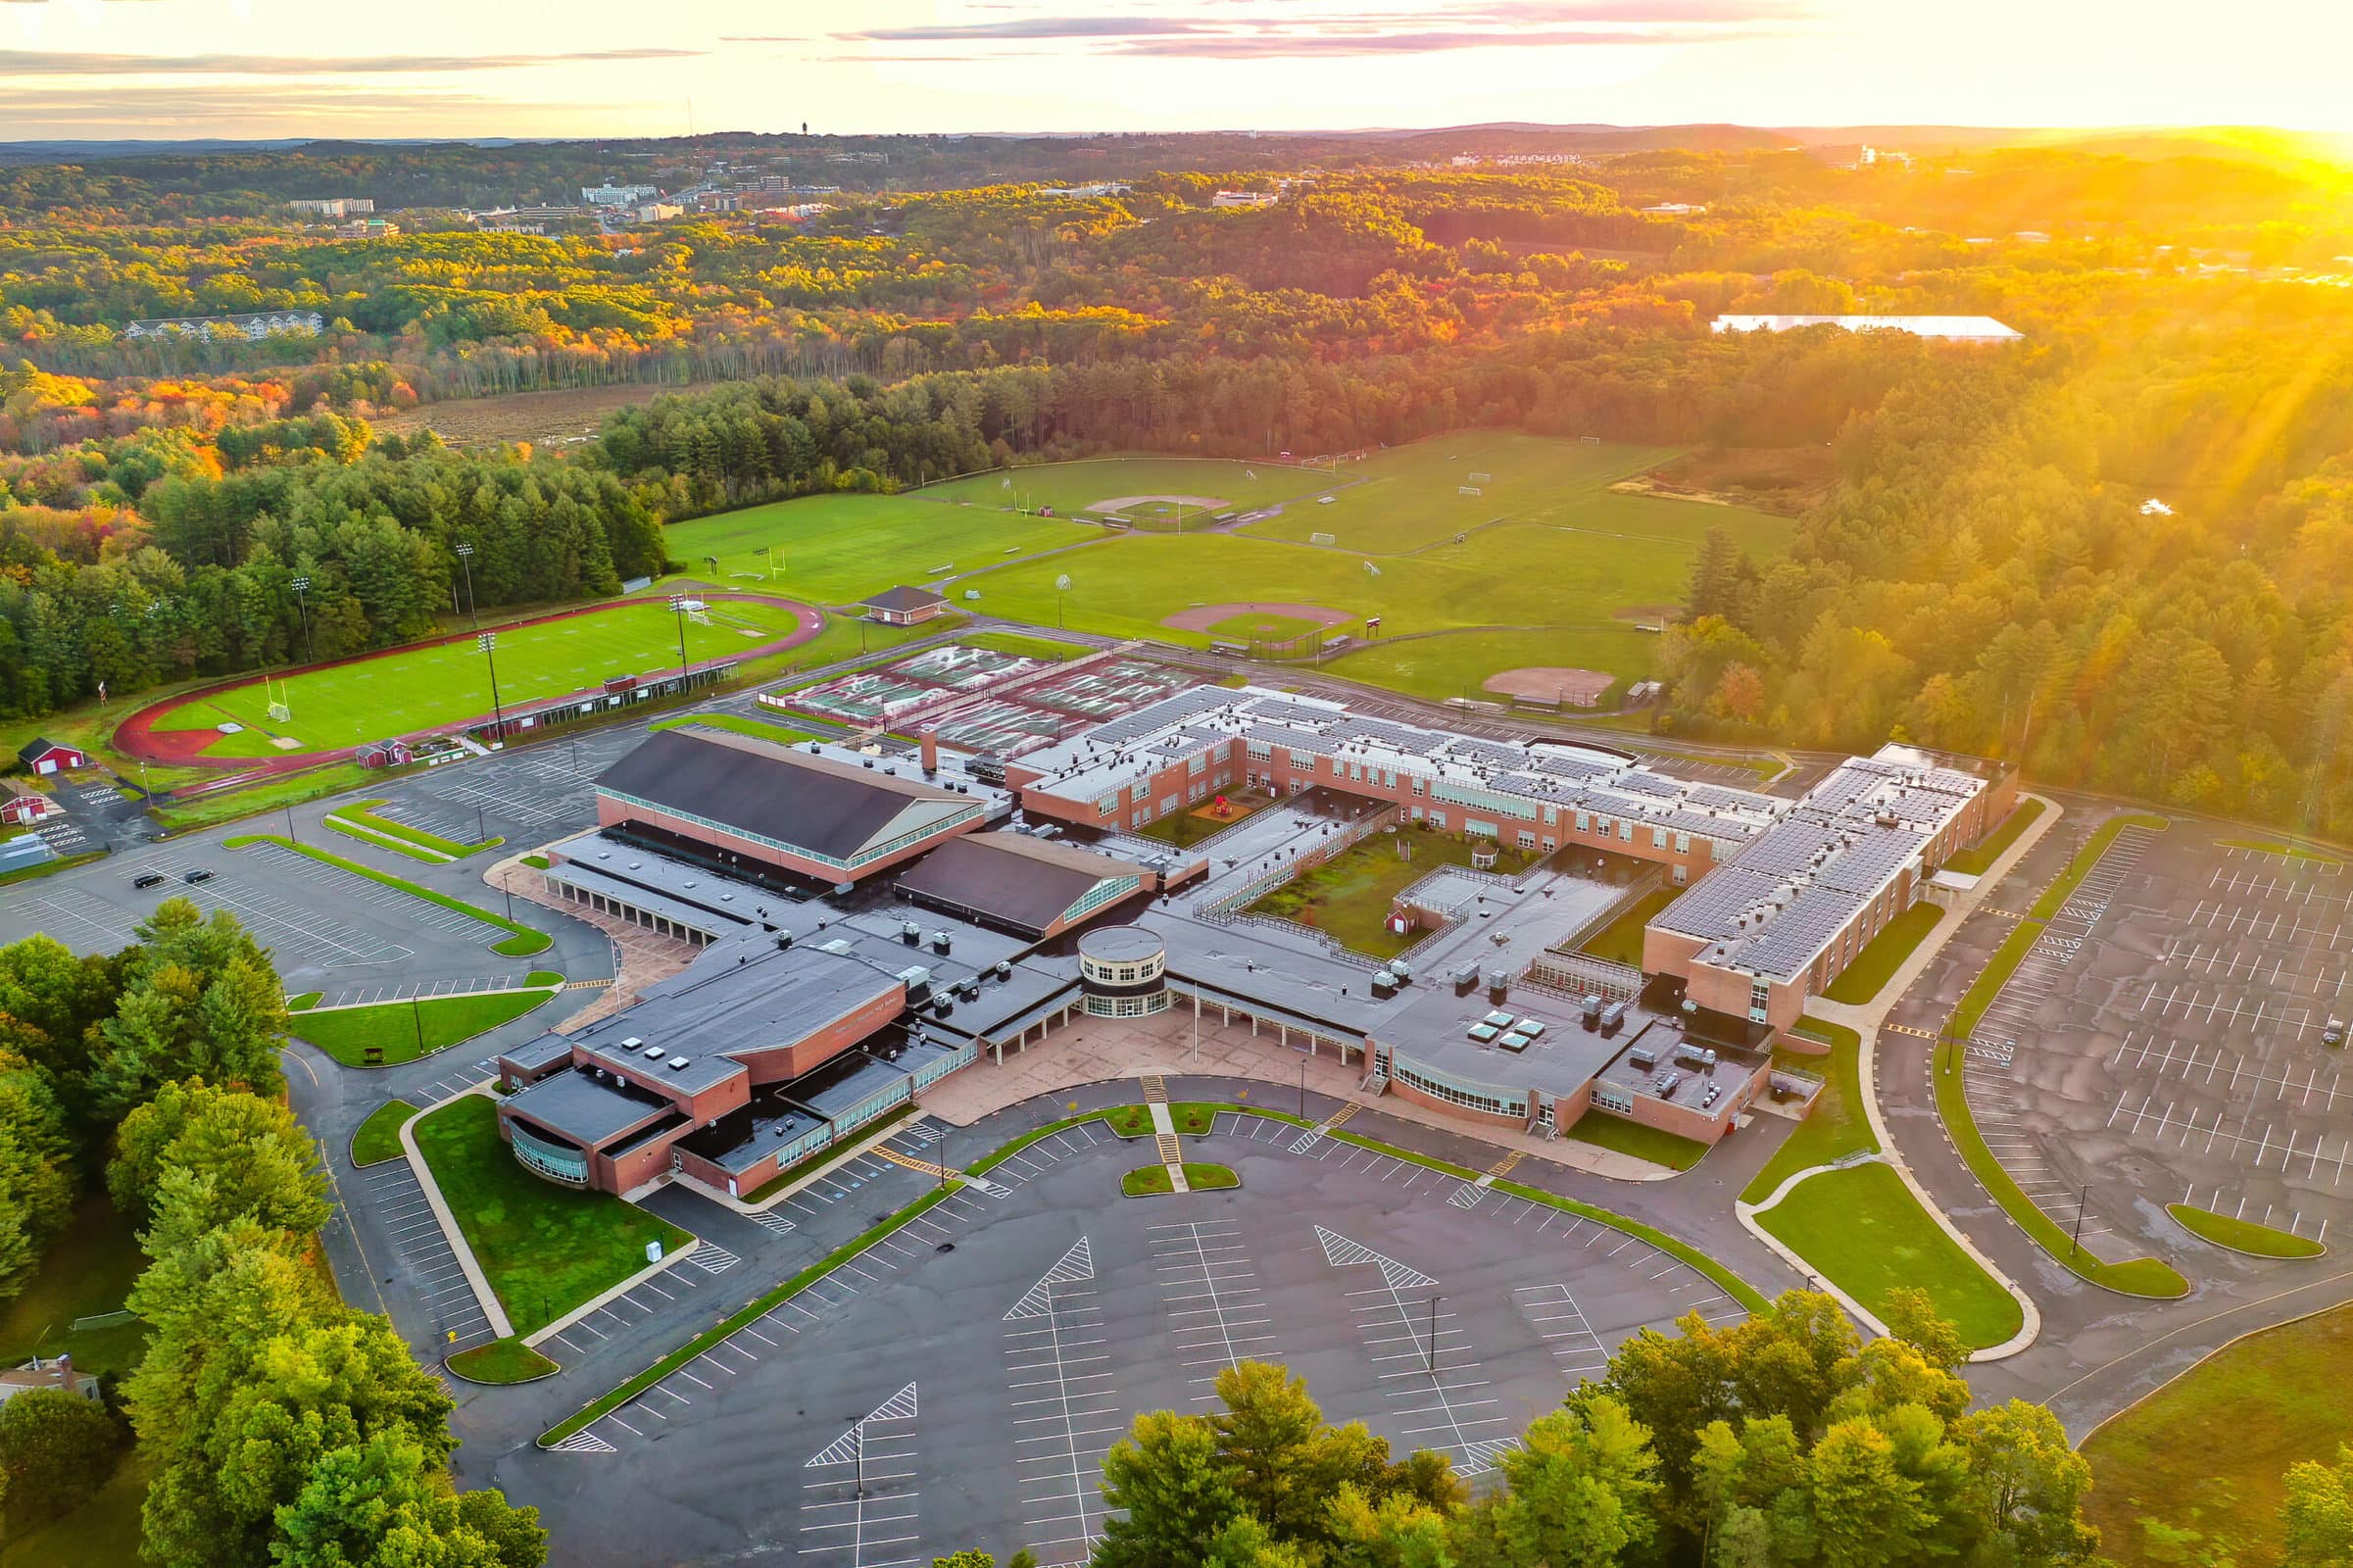 drone photo of Algonquin Regional High School in Northborough by Tami White